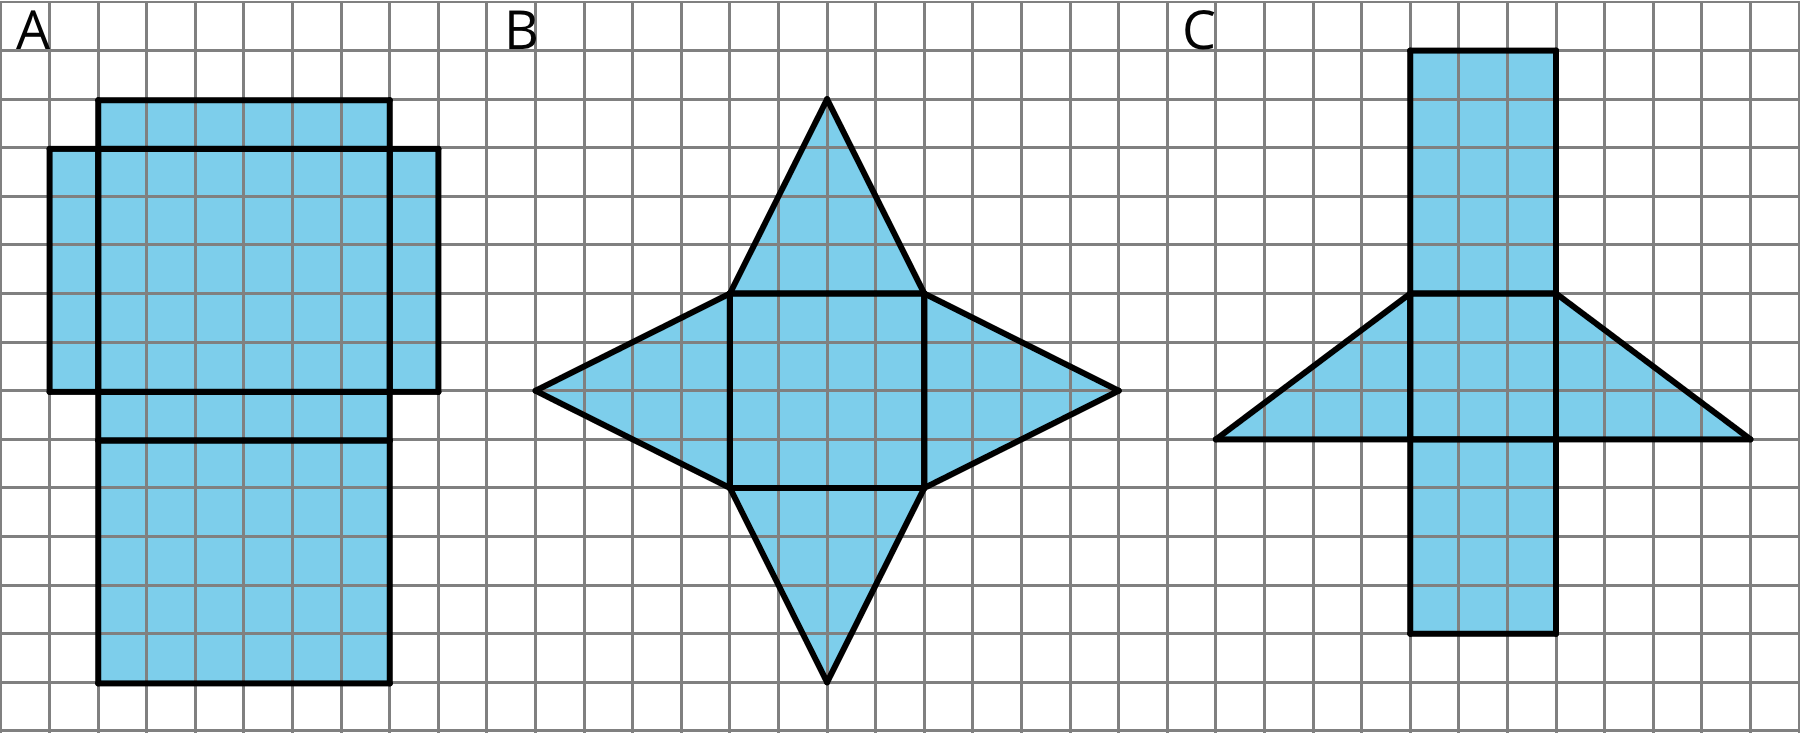 Three nets on a grid, labeled A, B, and C. Net A is composed of two rectangles that are 5 units tall by 6 units wide, two that are 5 units high and one unit wide, and two that are one unit high and six units wide. Net B is a square with a side length of 4 units and is surrounded by triangles that are four units wide at the base and four units high. Net C is a square with a side length of 3, a rectangle 3 units wide and 5 units high, another rectangle that is 3 units wide and 4 units tall, and two triangles, one on either side, that are three units tall by four units across.